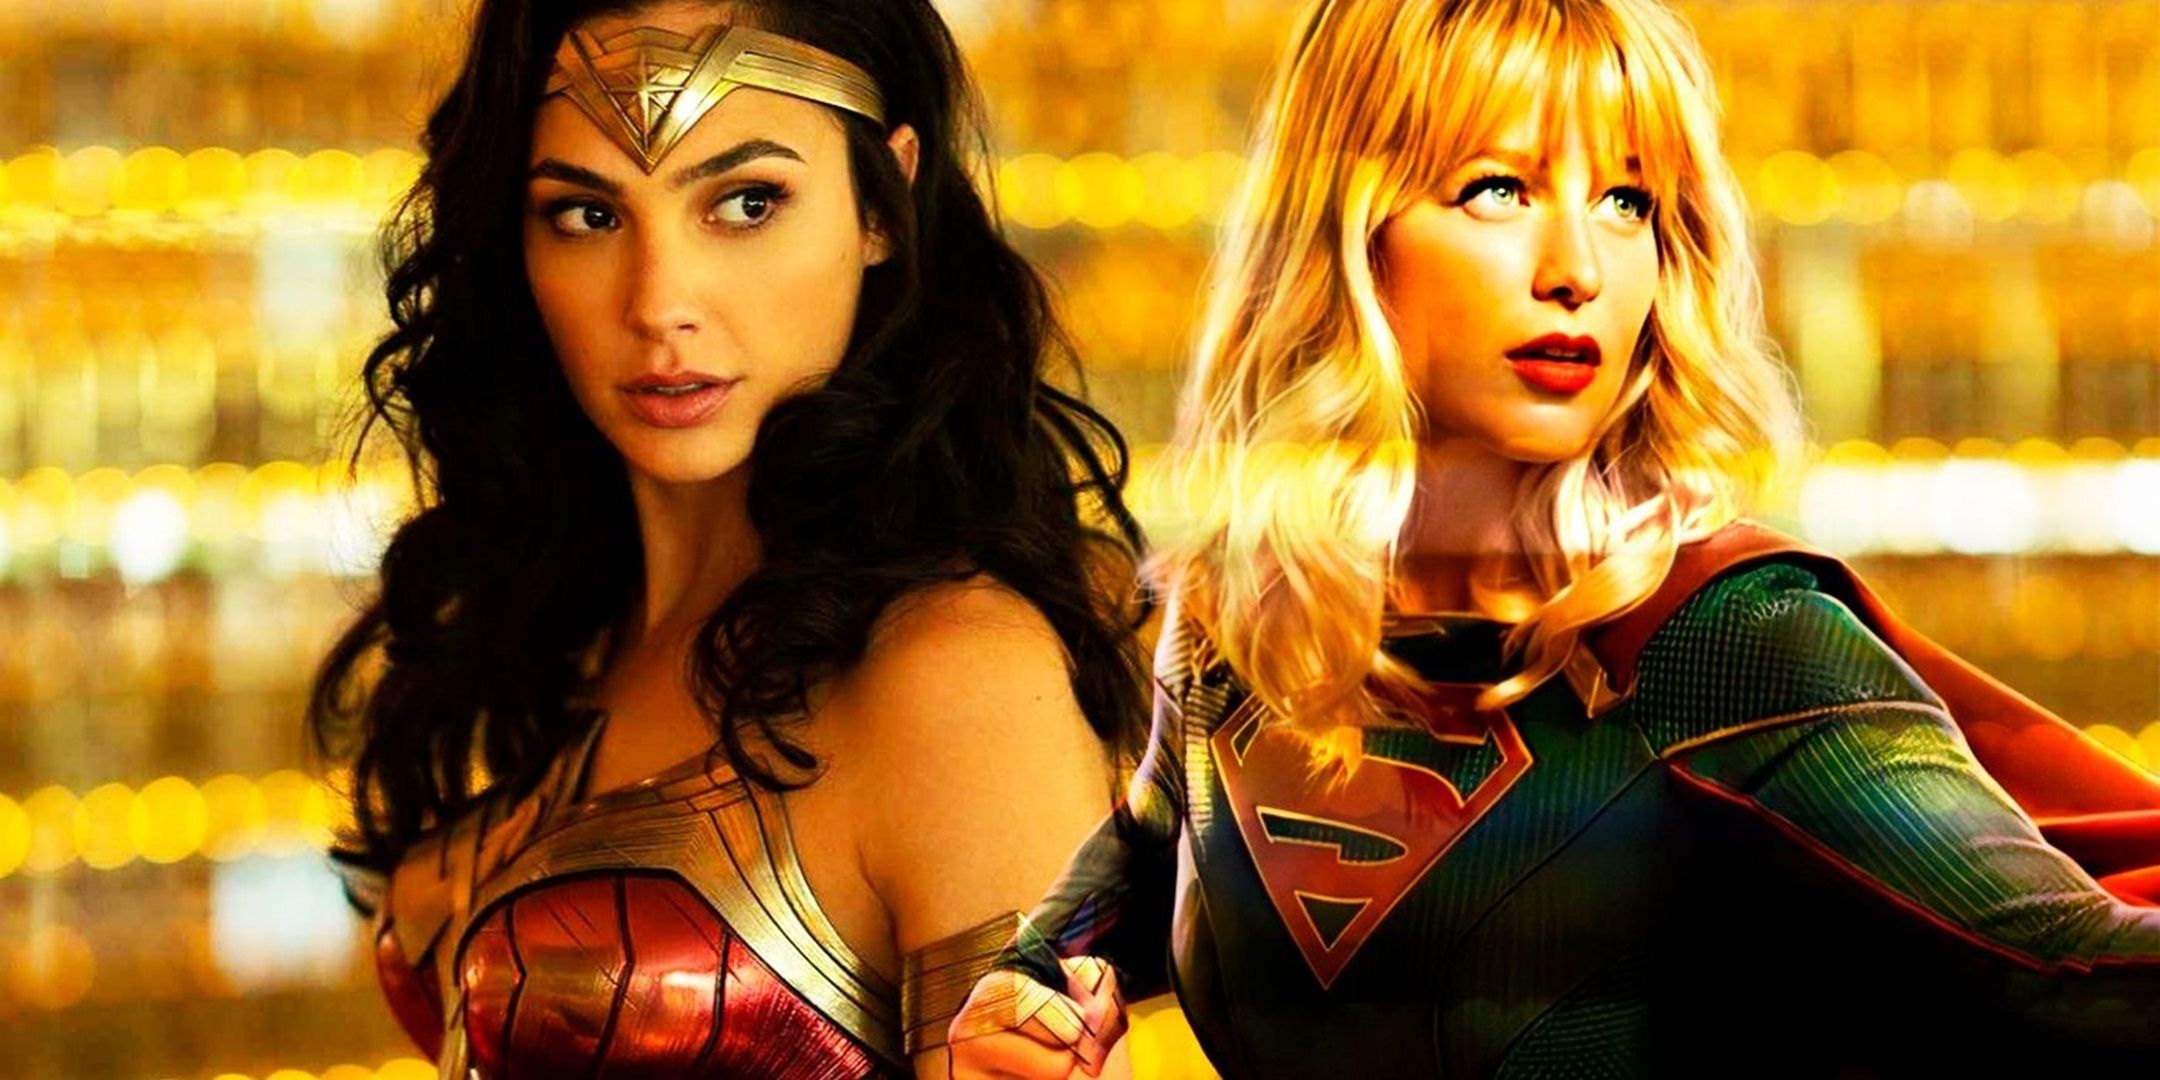 Wonder Woman and Supergirl together